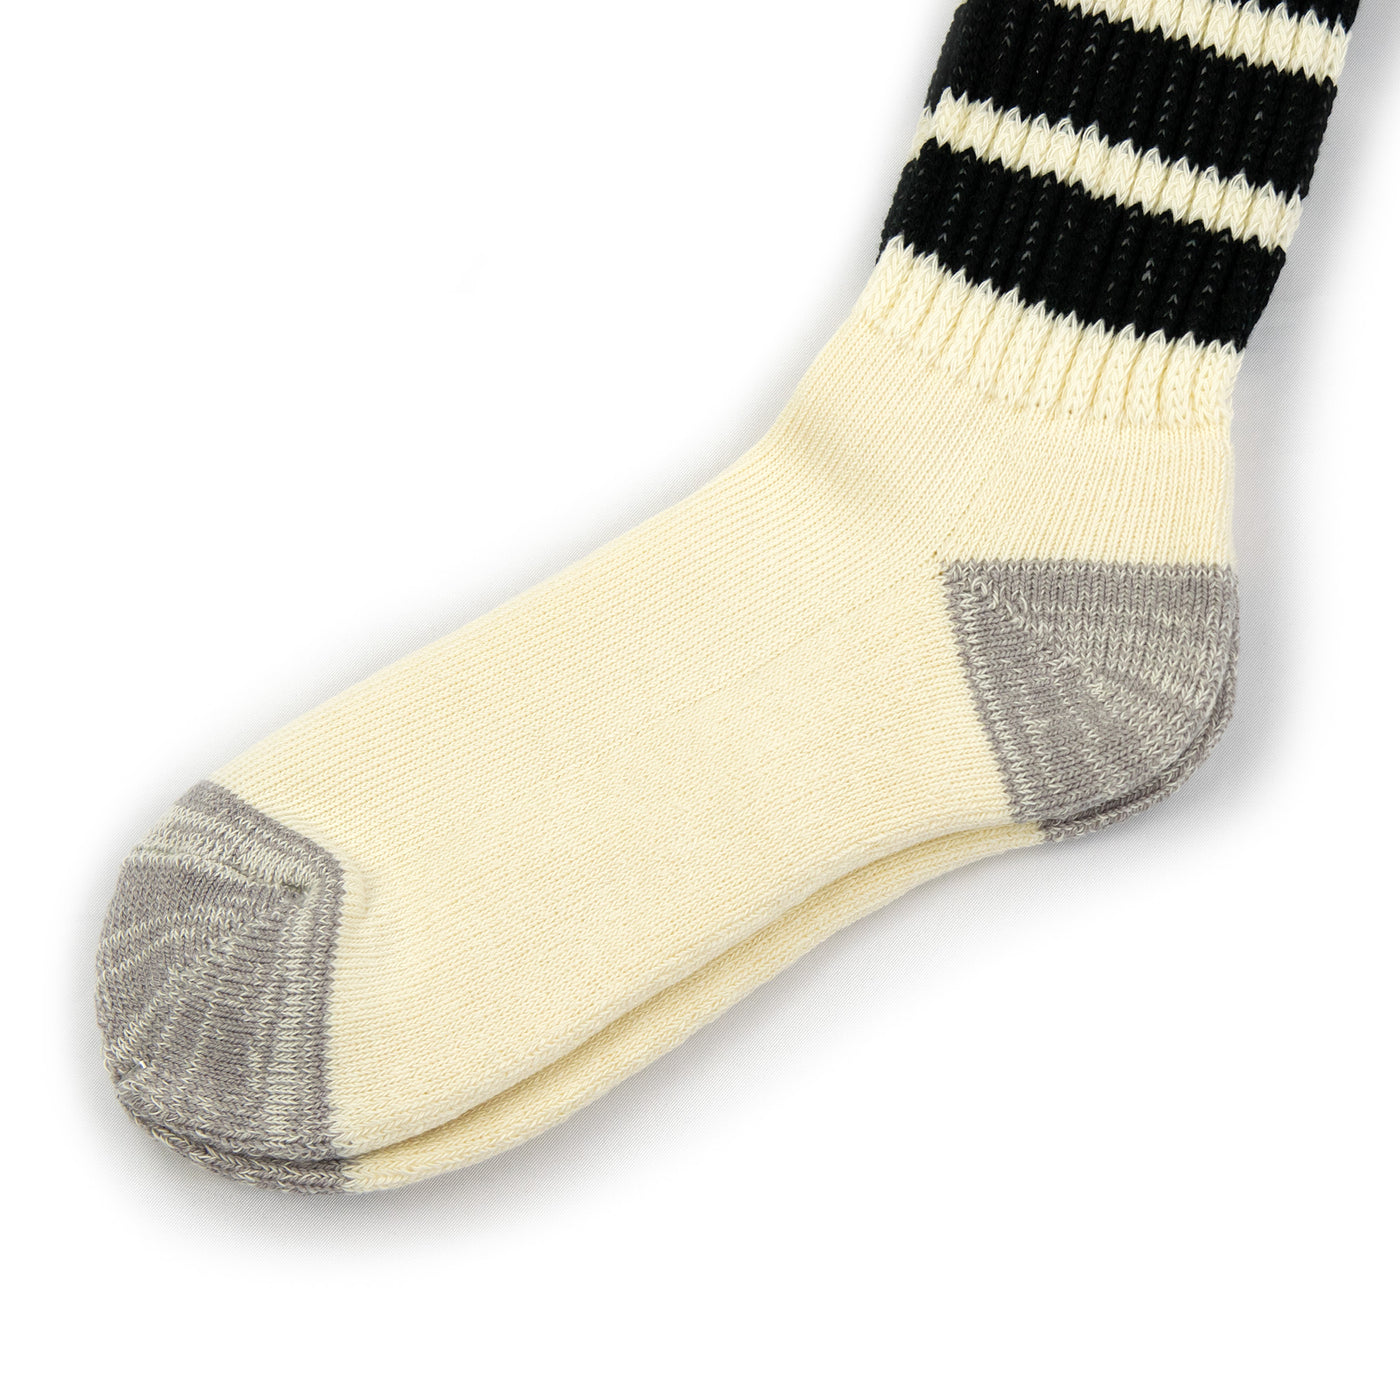 Rototo Coarse Ribbed Old School Sock Black Made in Japan Sole